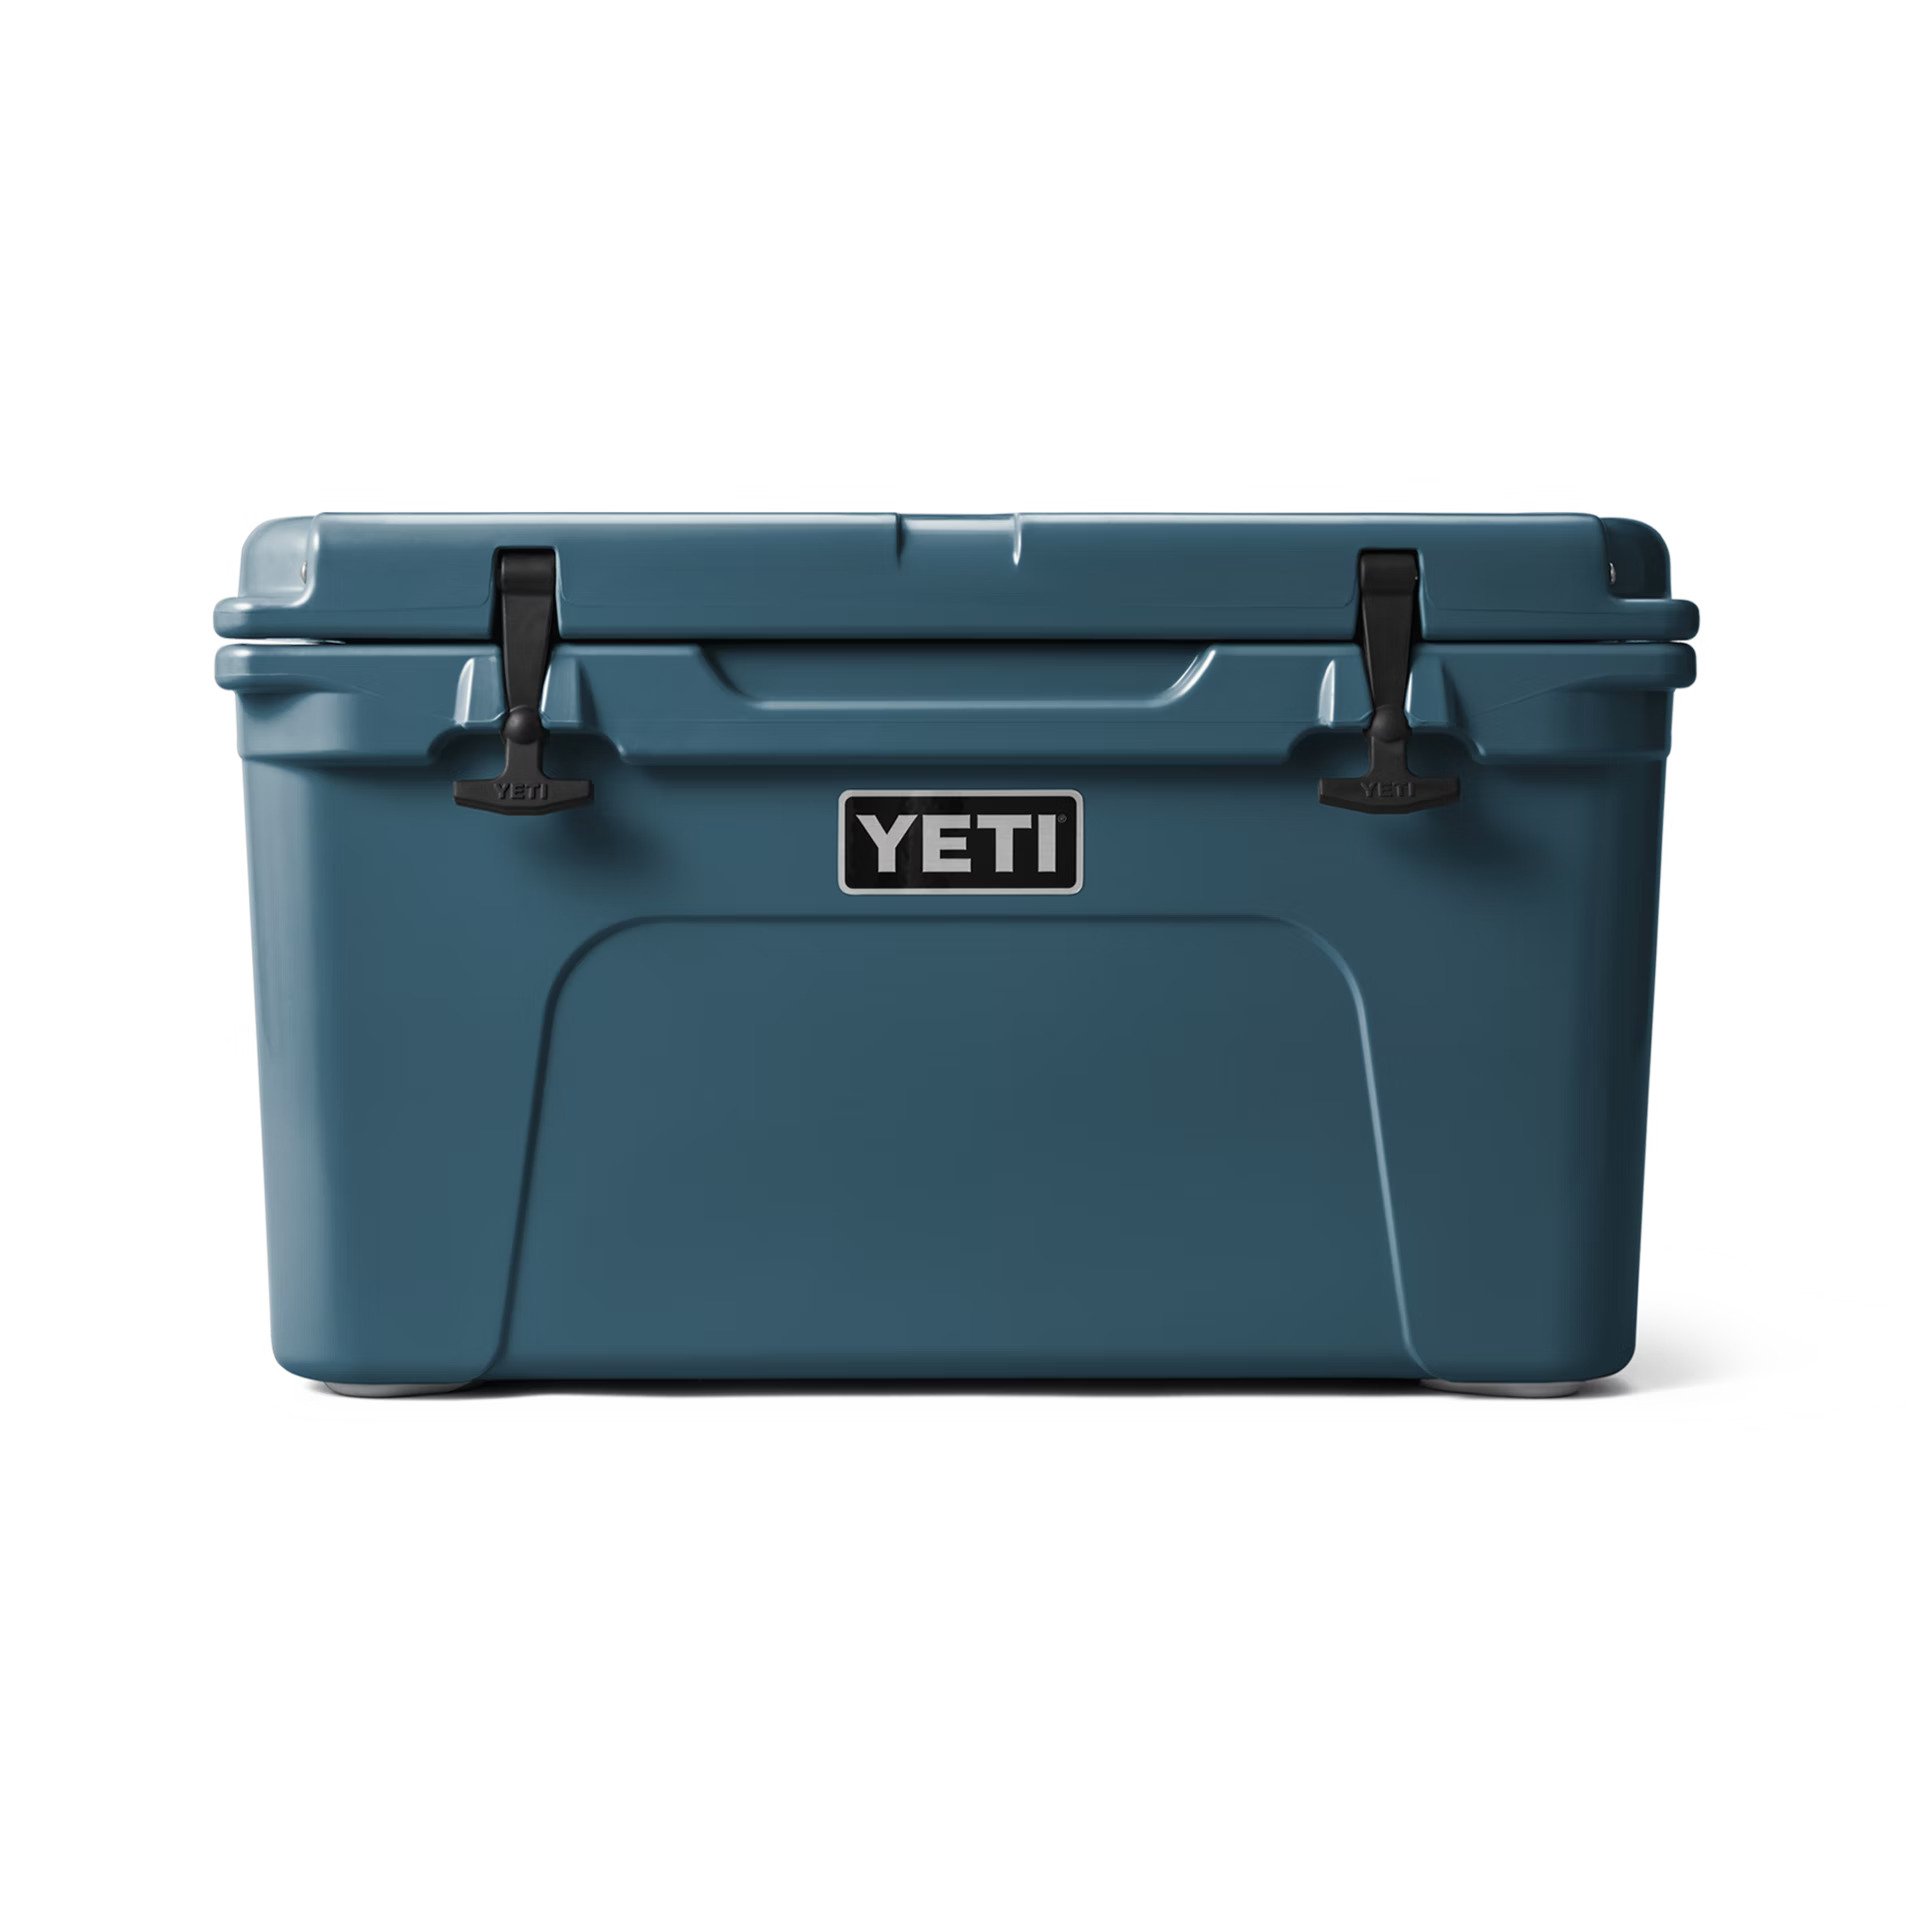 15 Best Coolers For The Money In 2023 That Are Rugged And Dependable ...